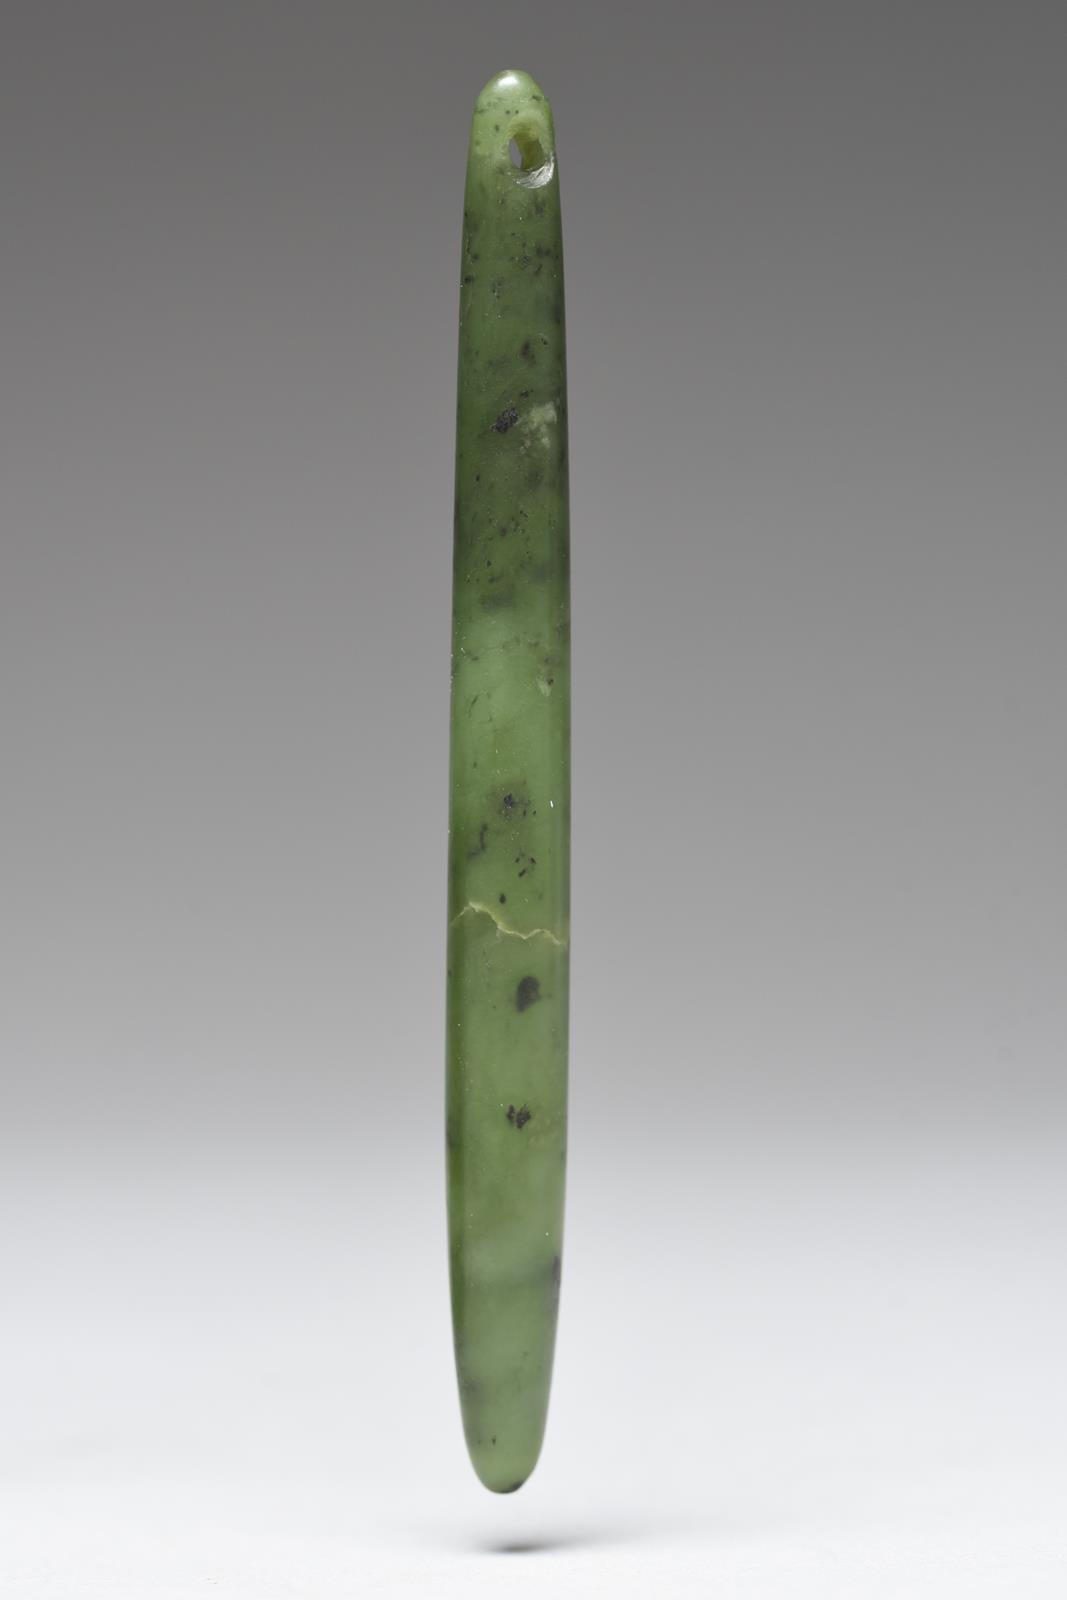 A Maori ear pendant New Zealand nephrite, with a pierced suspension hole to the top, 12.2cm long. - Image 2 of 2